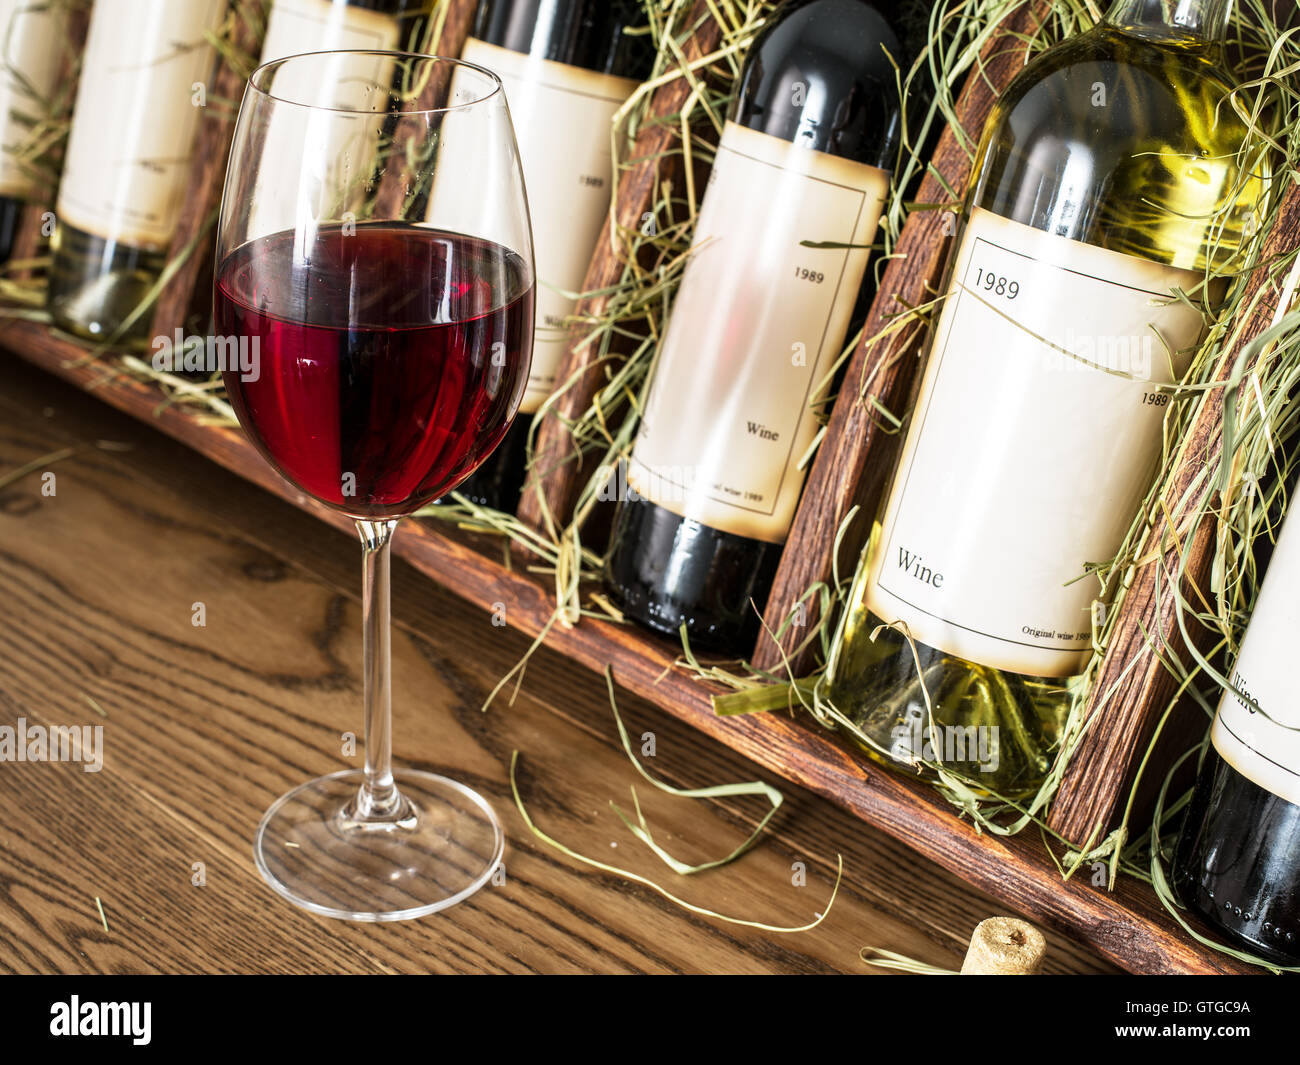 Glass of red wine and wine bottles on the background. Stock Photo